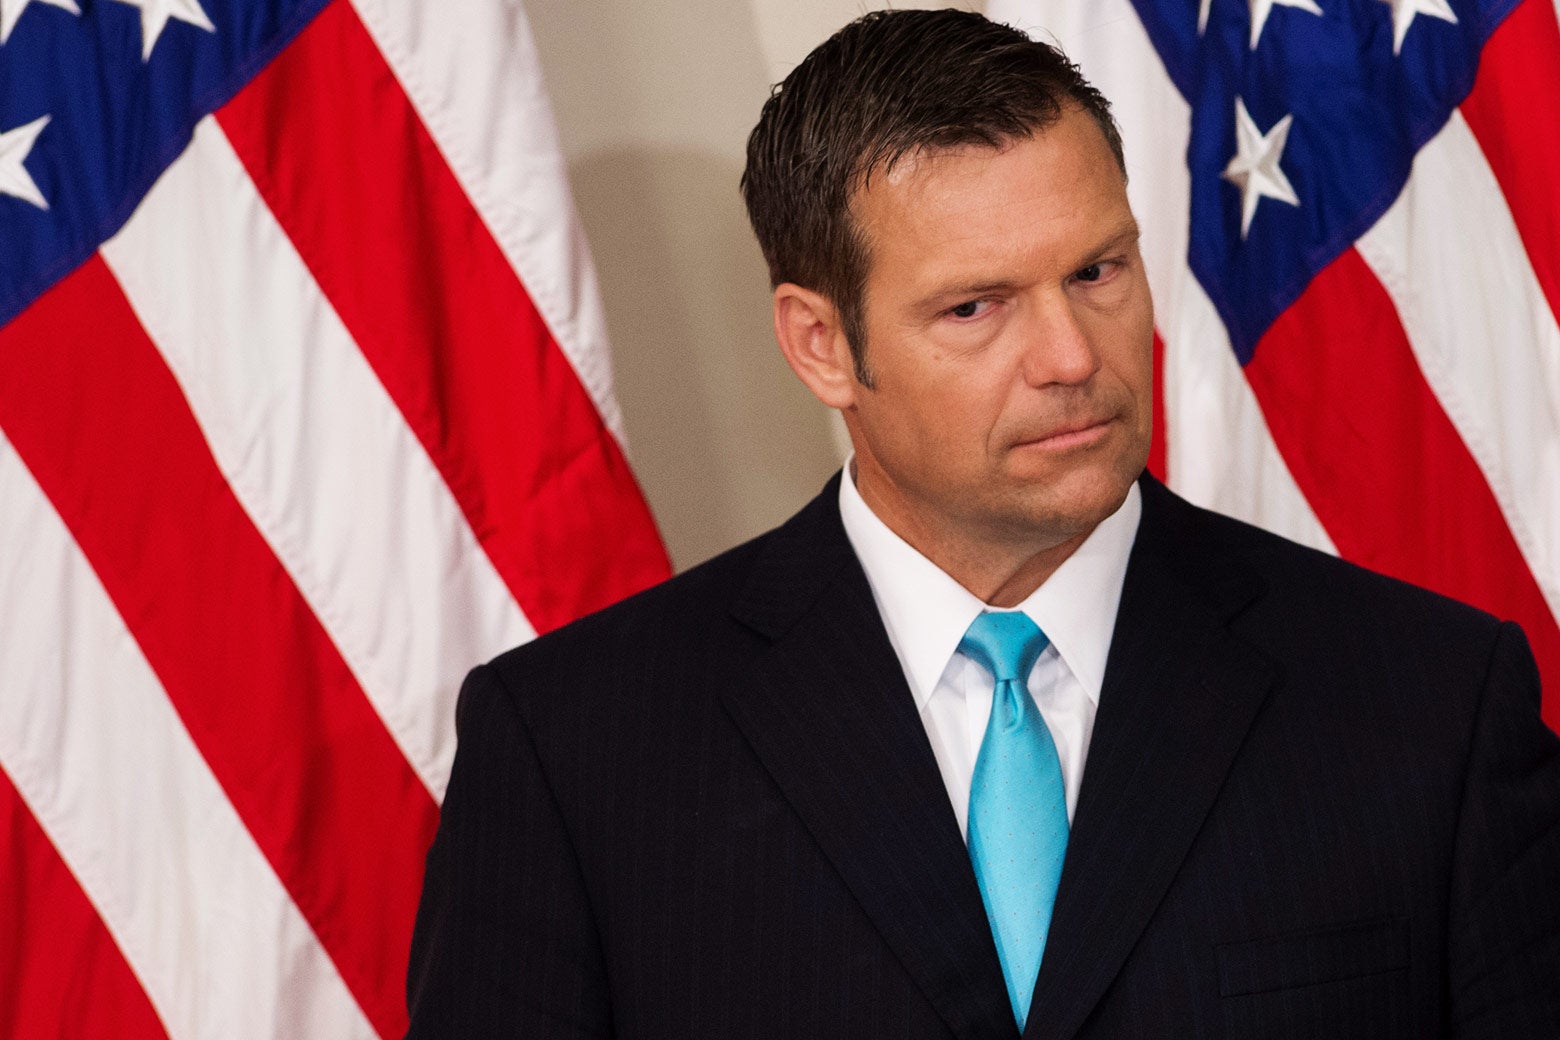 Kansas Secretary of State Kris Kobach listens as President Donald Trump speaks during the first meeting of the Presidential Advisory Commission on Election Integrity in the Eisenhower Executive Office Building next to the White House in Washington on July 19.